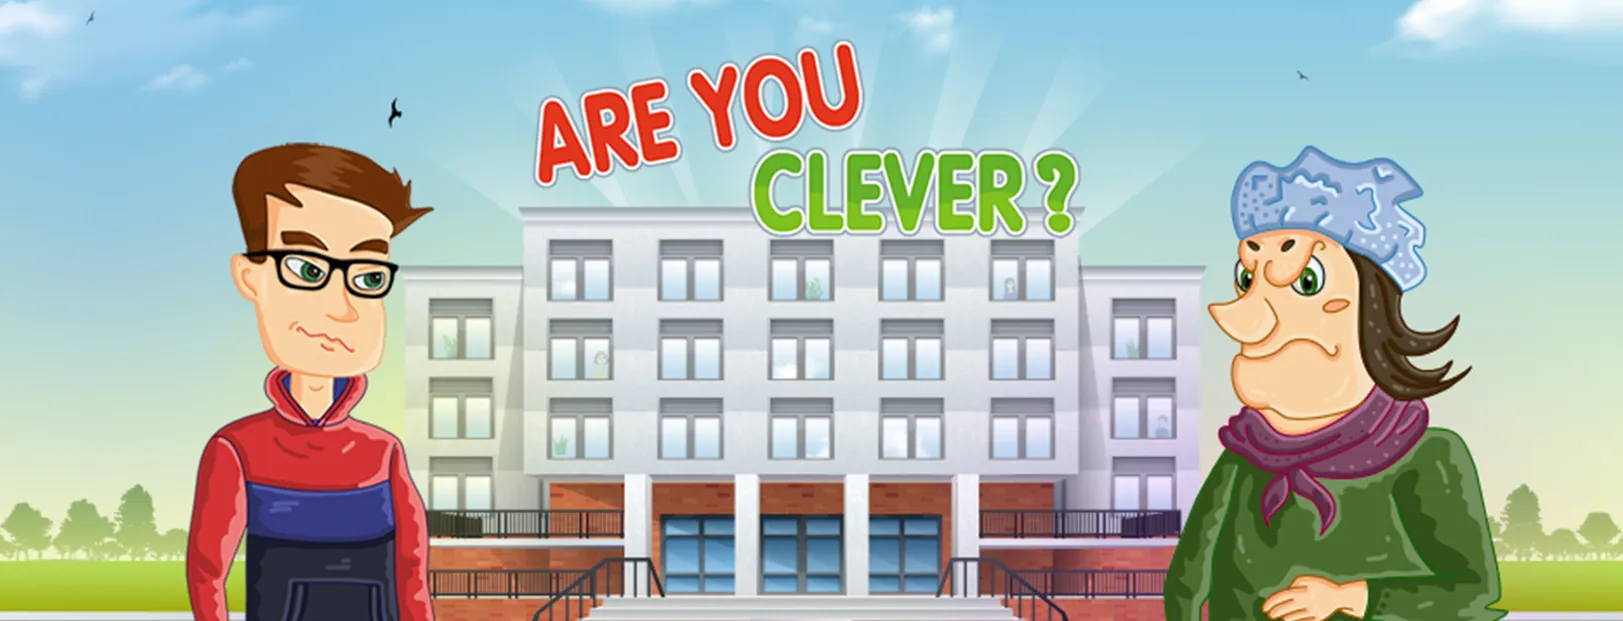 Are you clever?